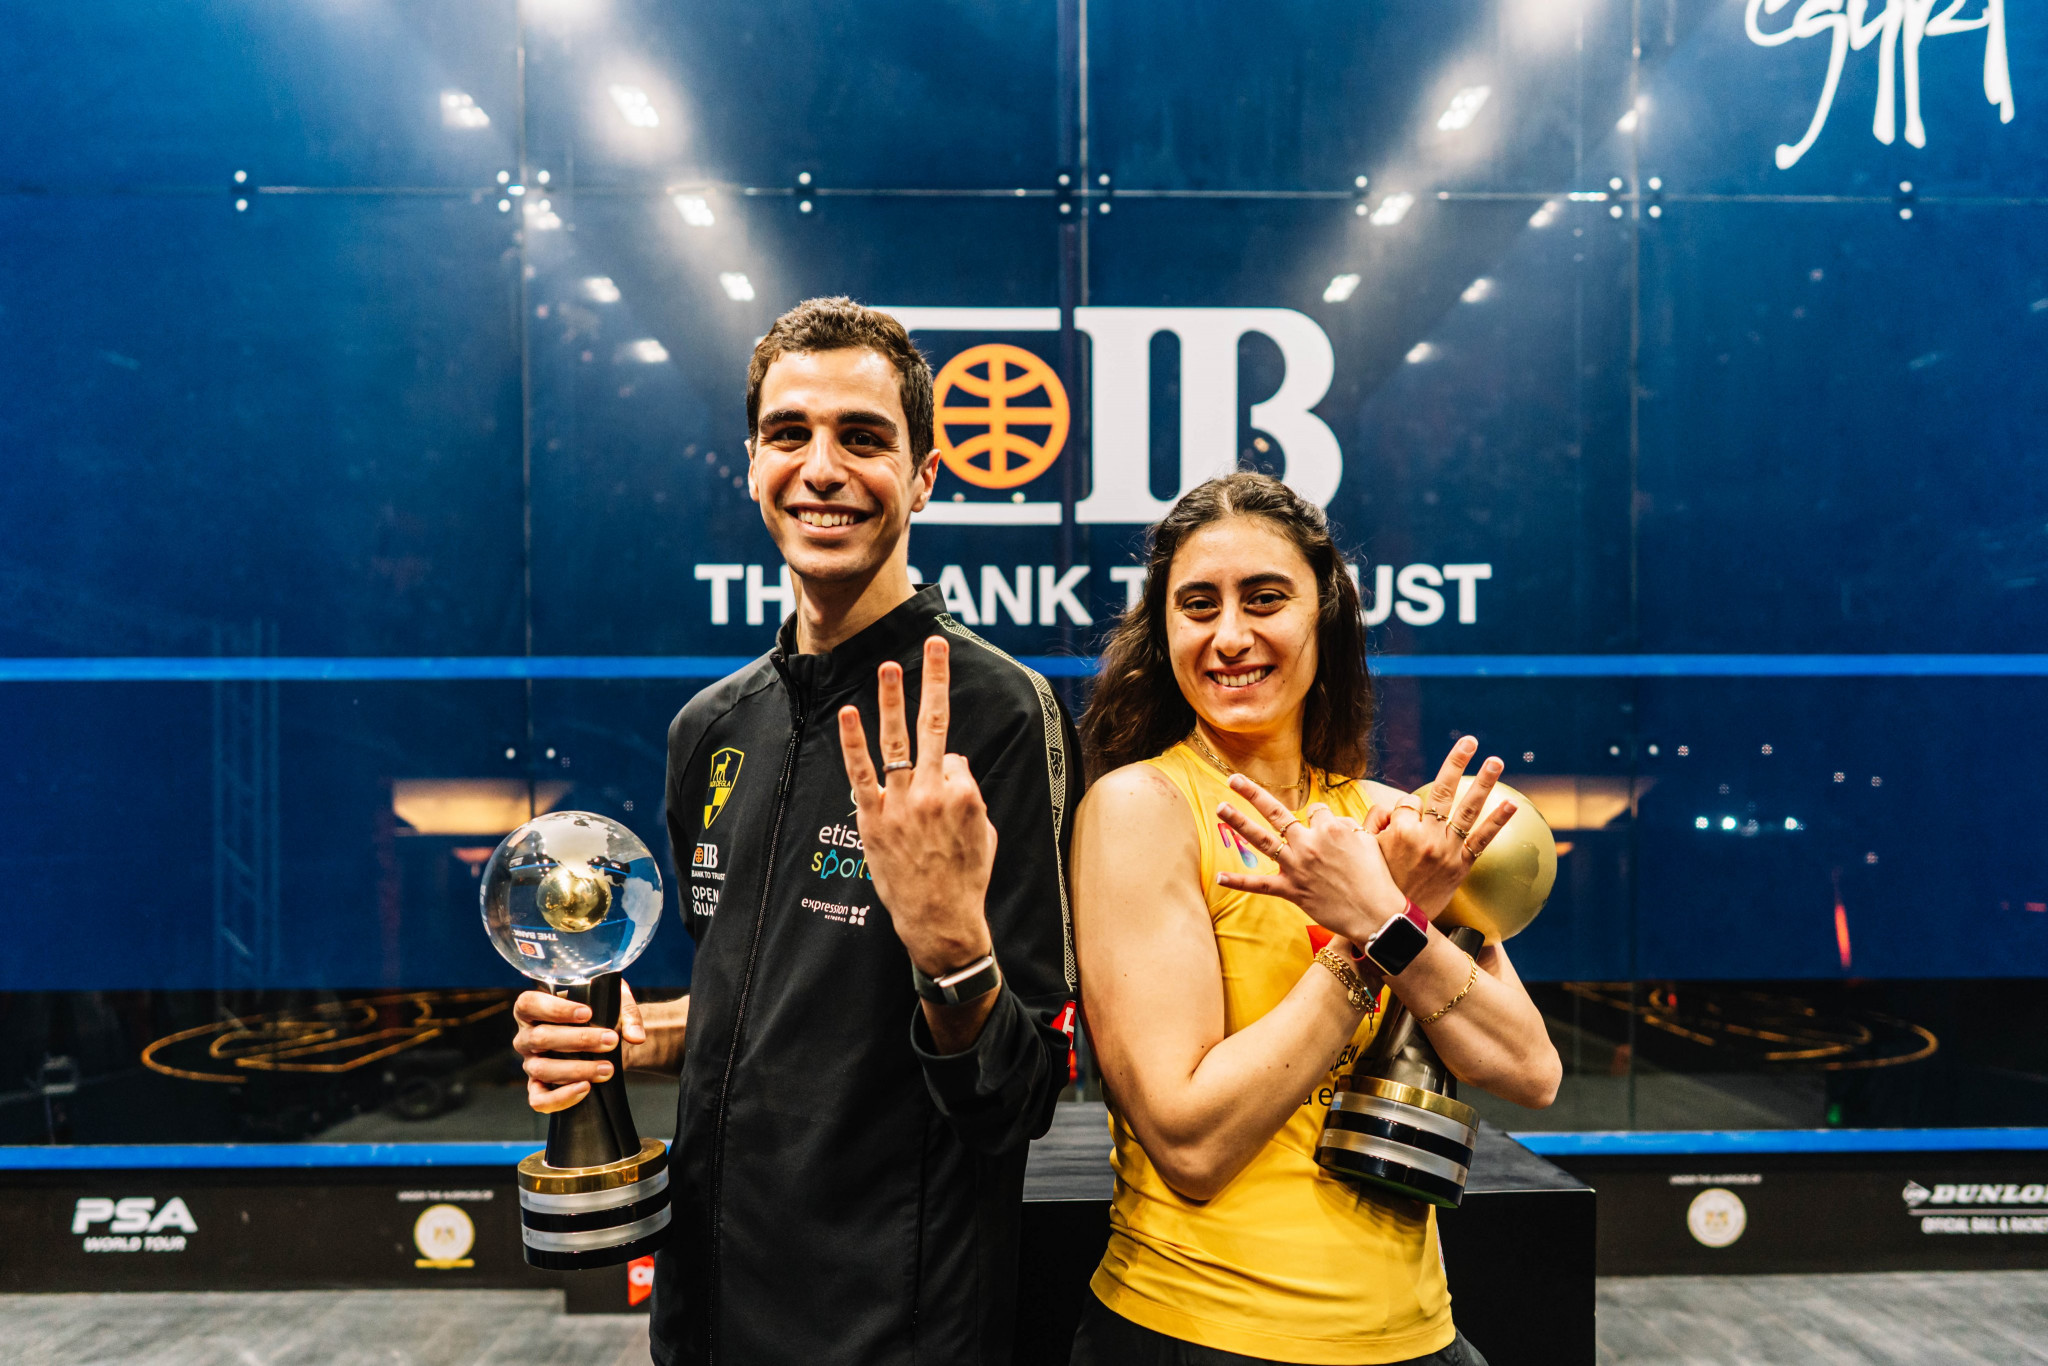 Ali Farag and Nour El Sherbini defended their respective titles in Cairo ©PSA World Tour